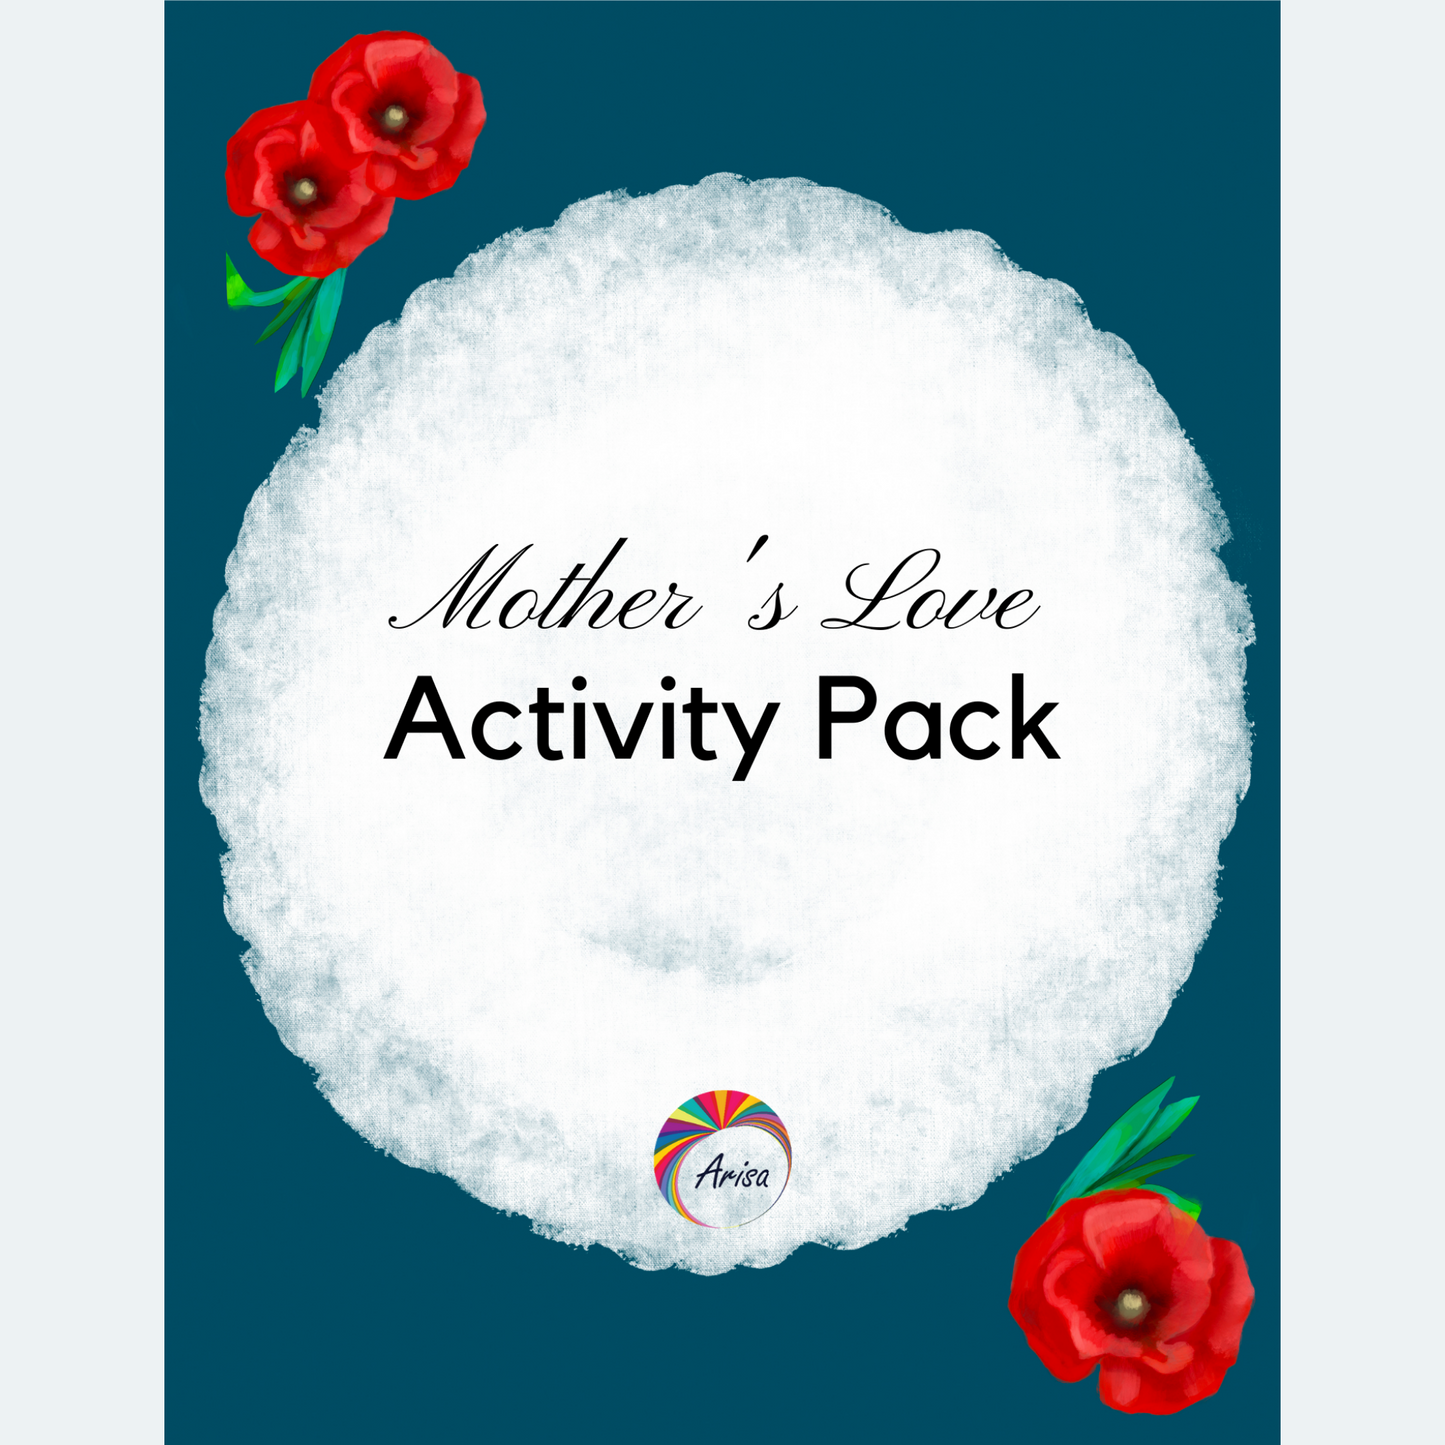 The cover of Mother's Love Activity Pack by ArisaTeam